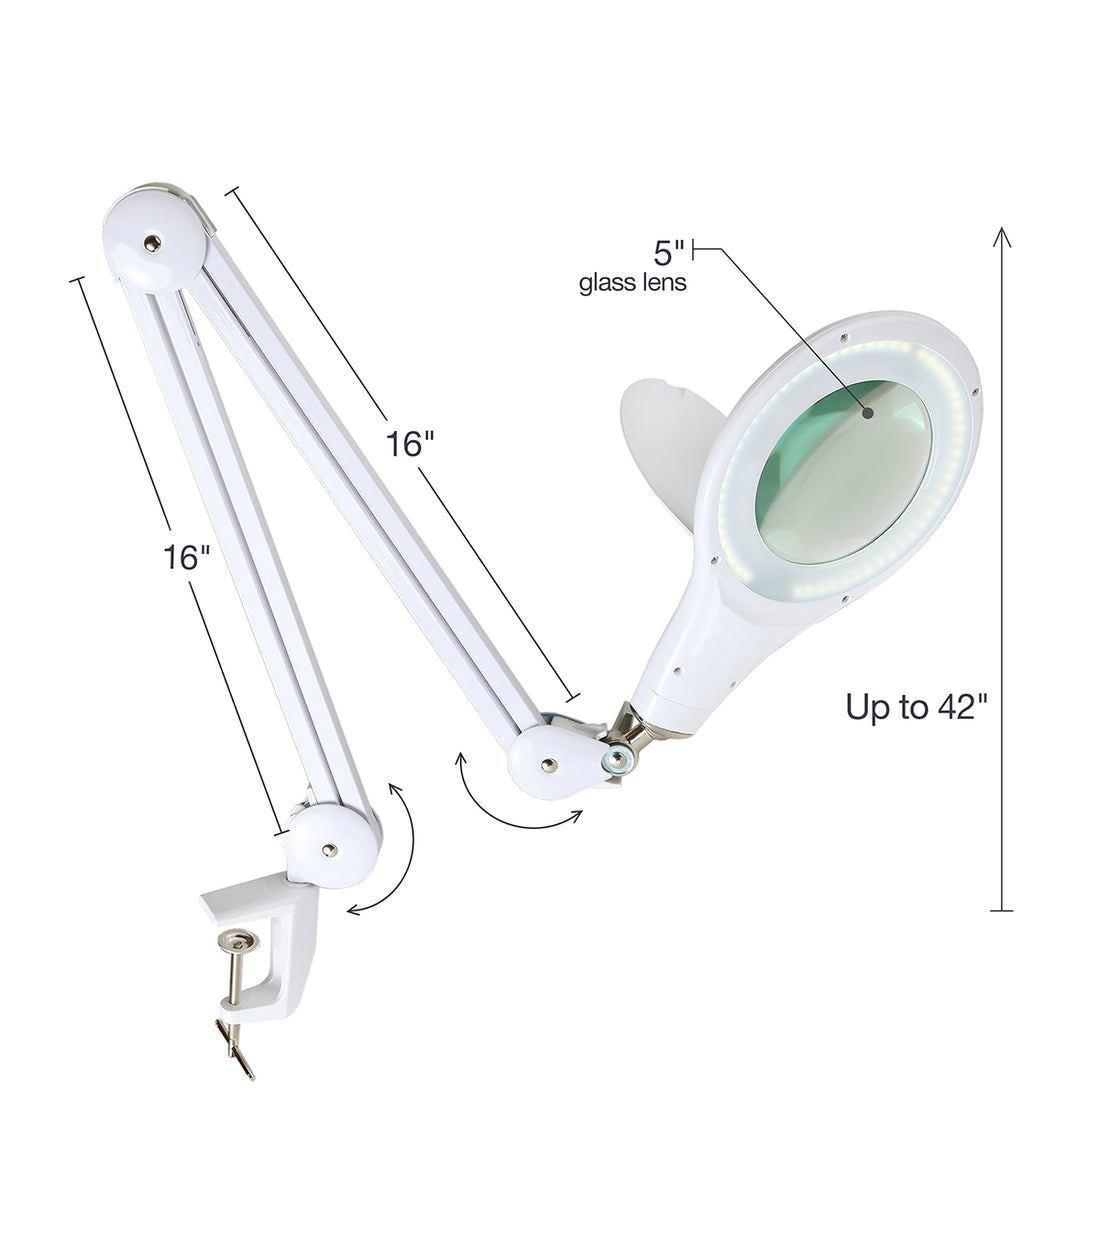 Brightech Lightview Magnifying Glass & Bright LED Lamp with Stand, Cla –  Lumez Lights